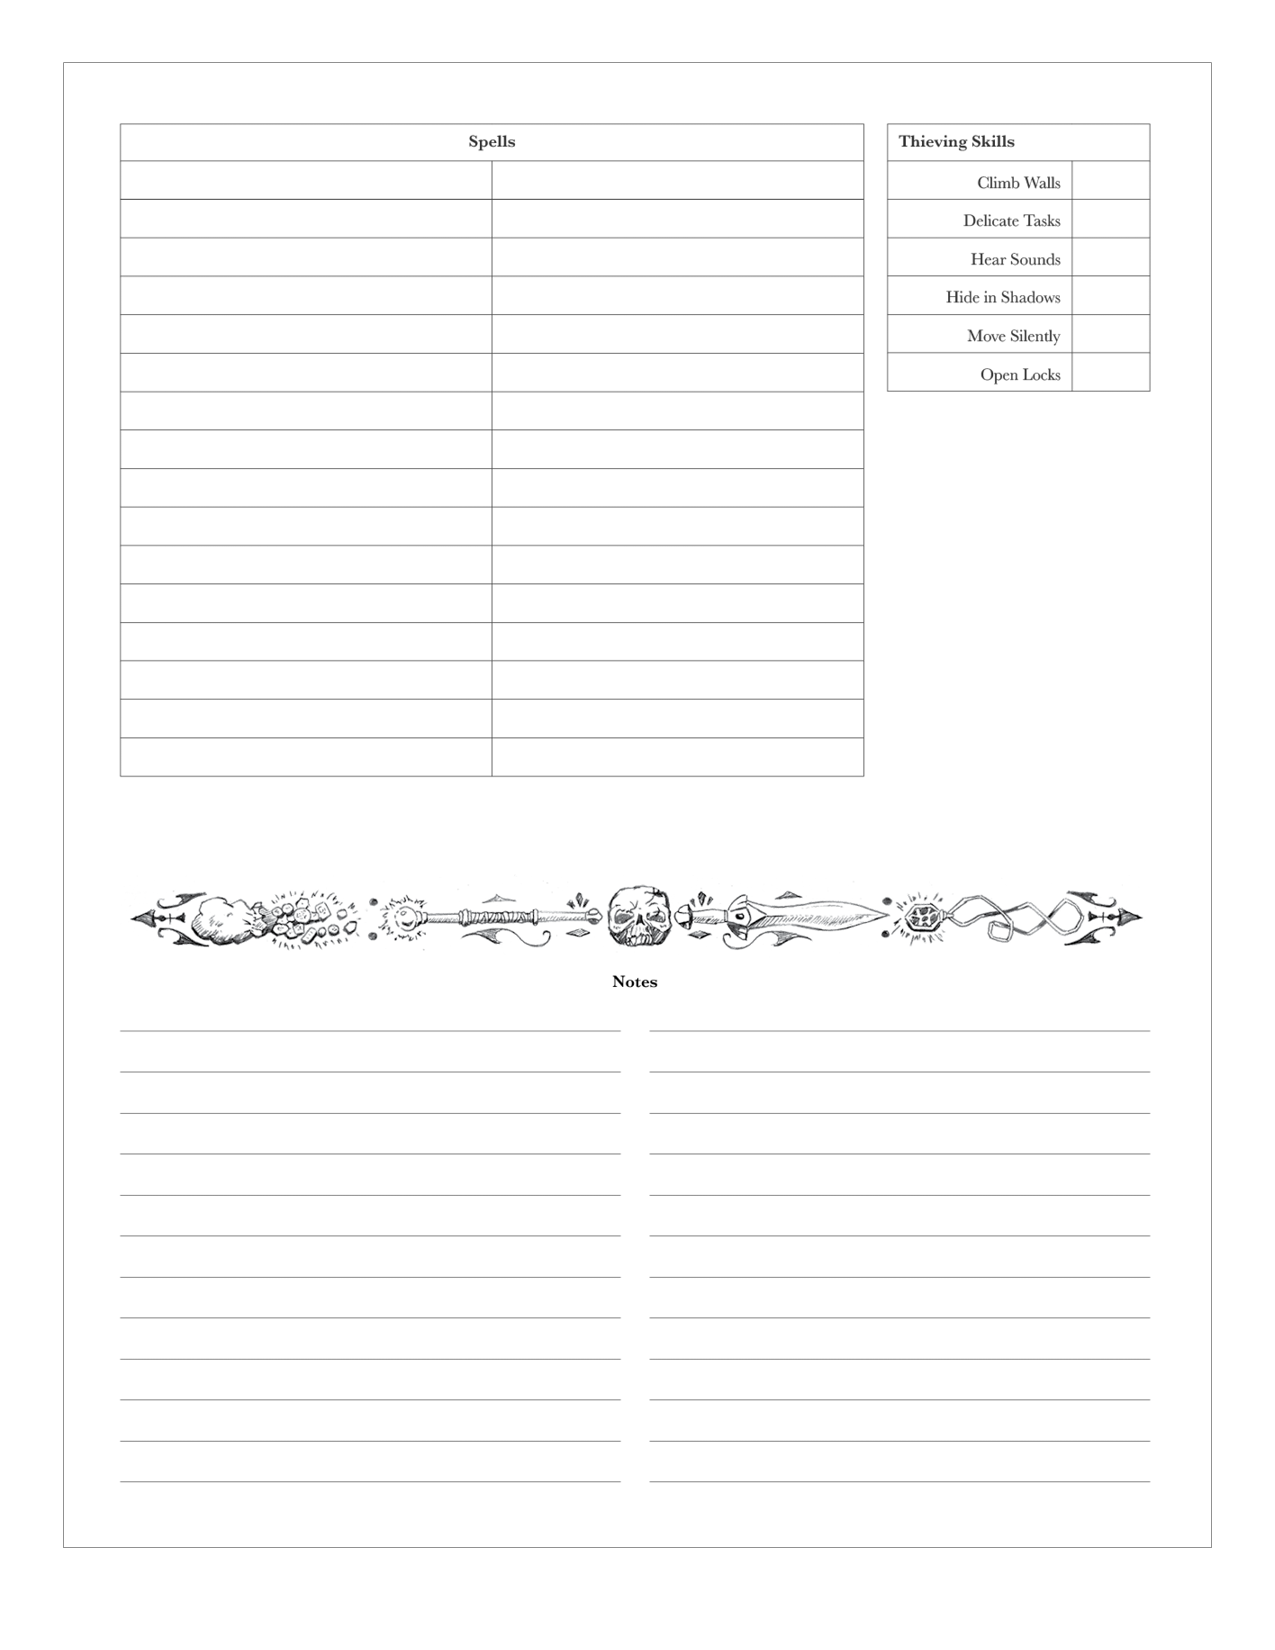 Swords & Wizardry Complete Character Sheets - PDF (FREE!)